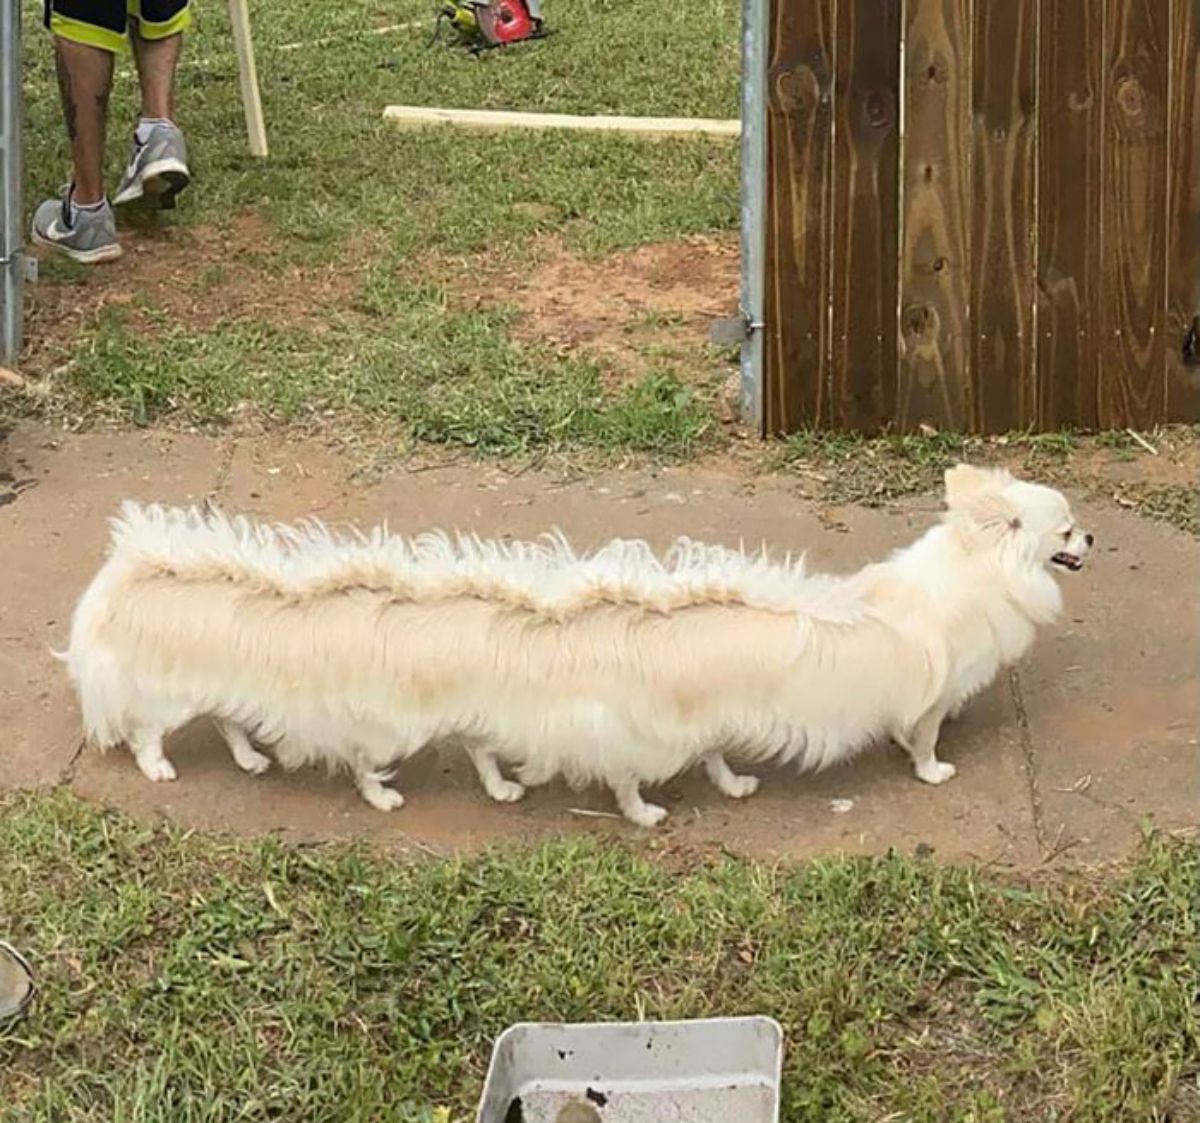 panoramic fail of brown and white dog with a long body and many legs standing in a garden